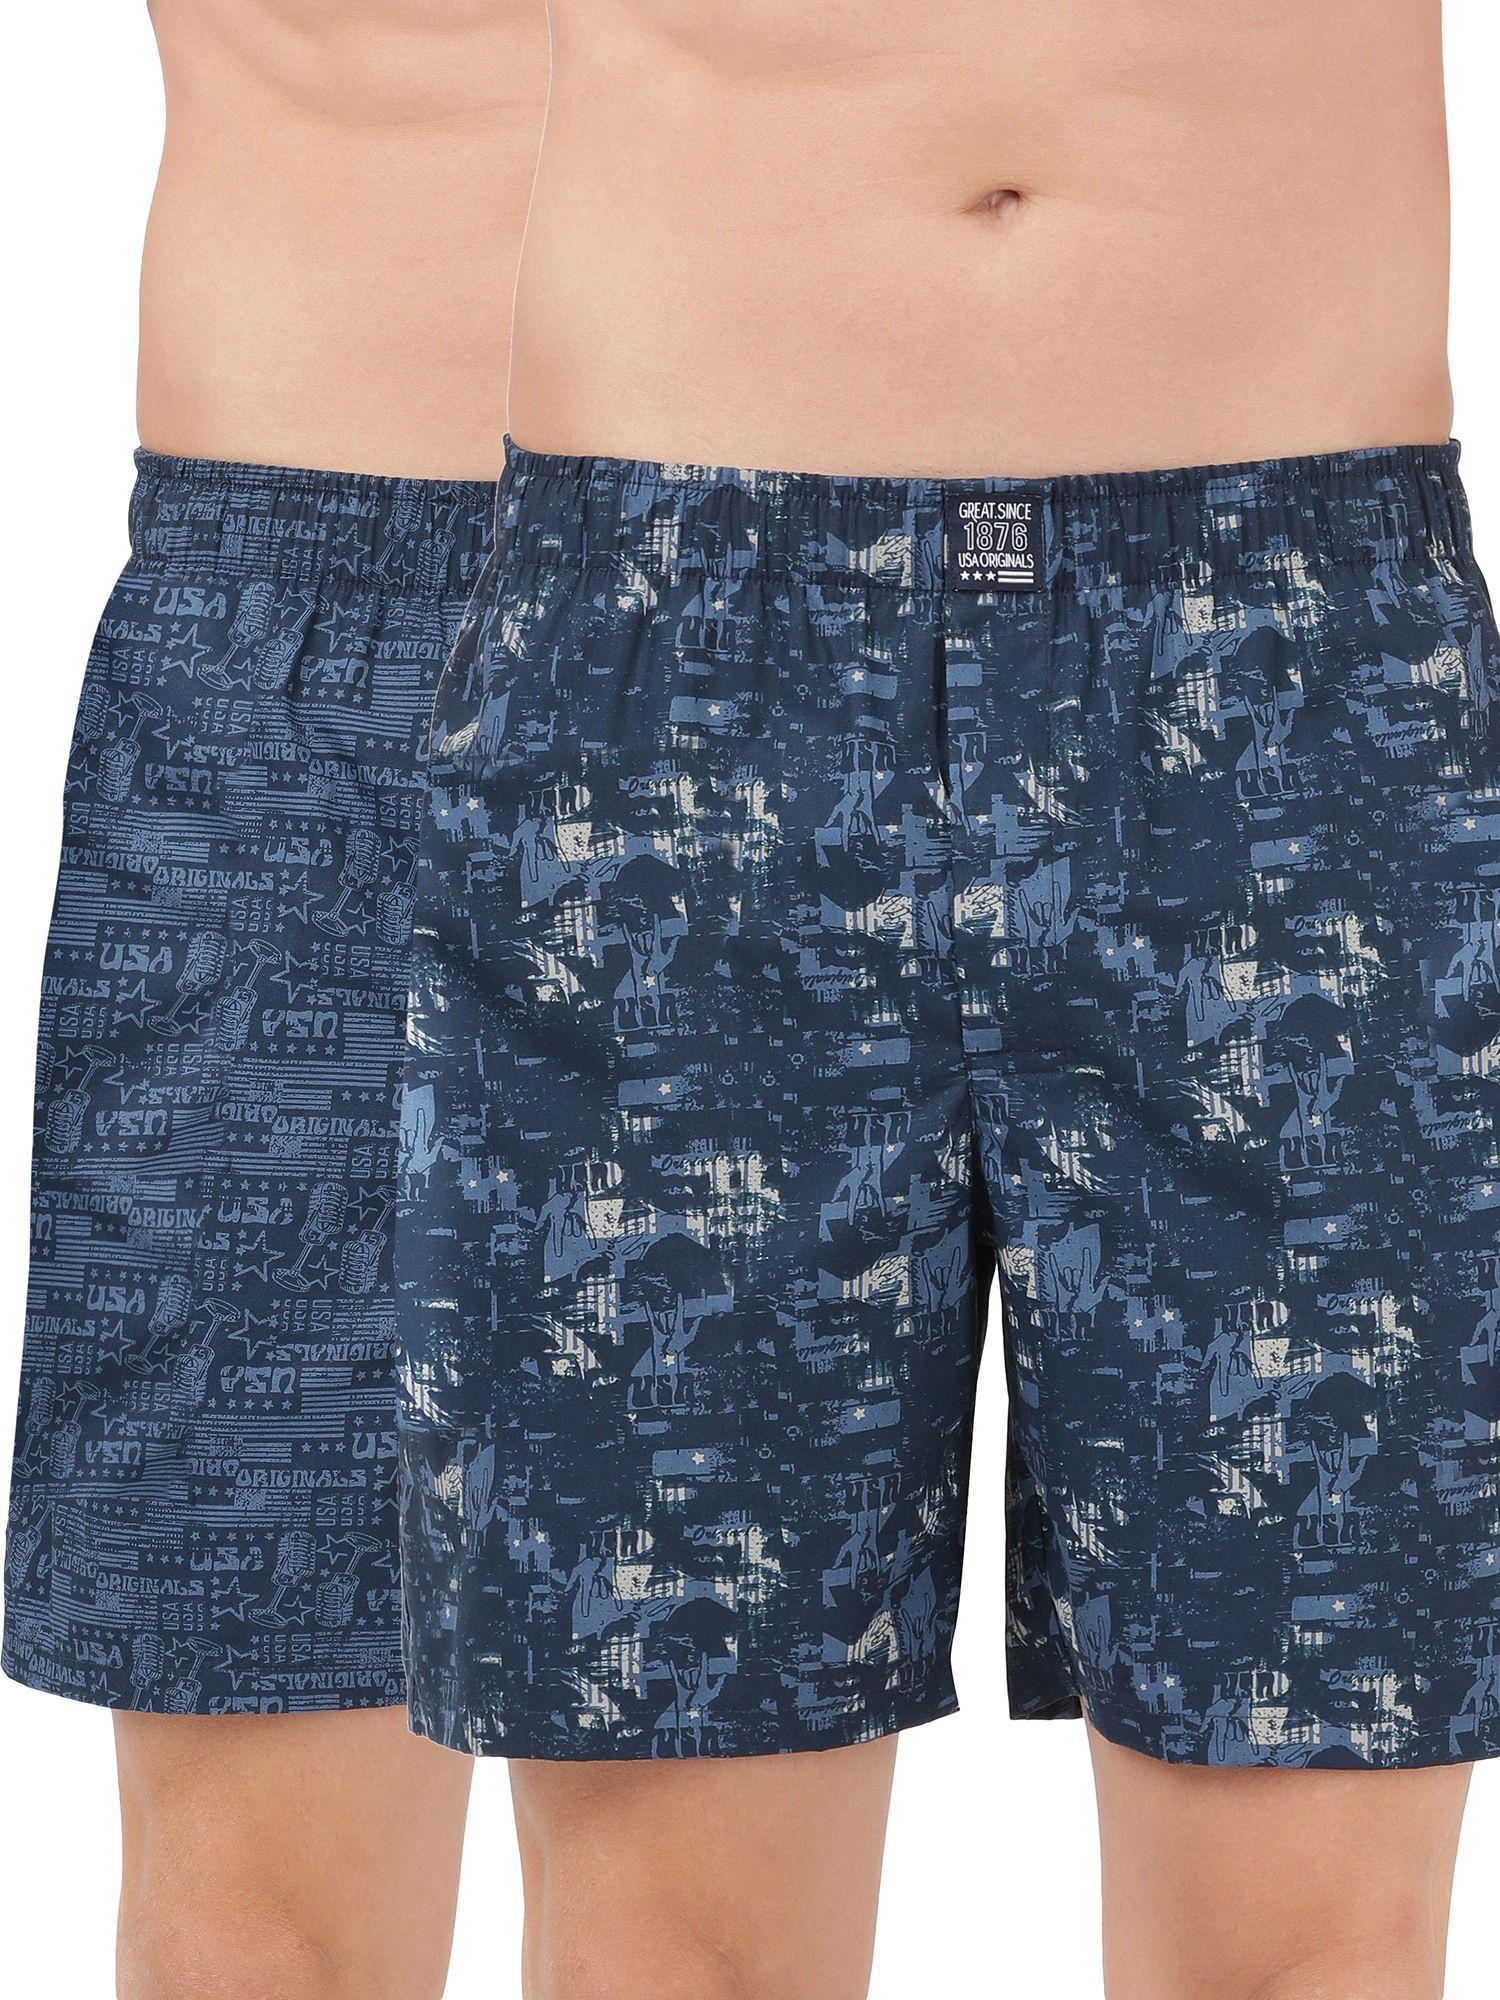 us57 mens cotton woven boxer shorts with side pocket - navy (pack of 2)